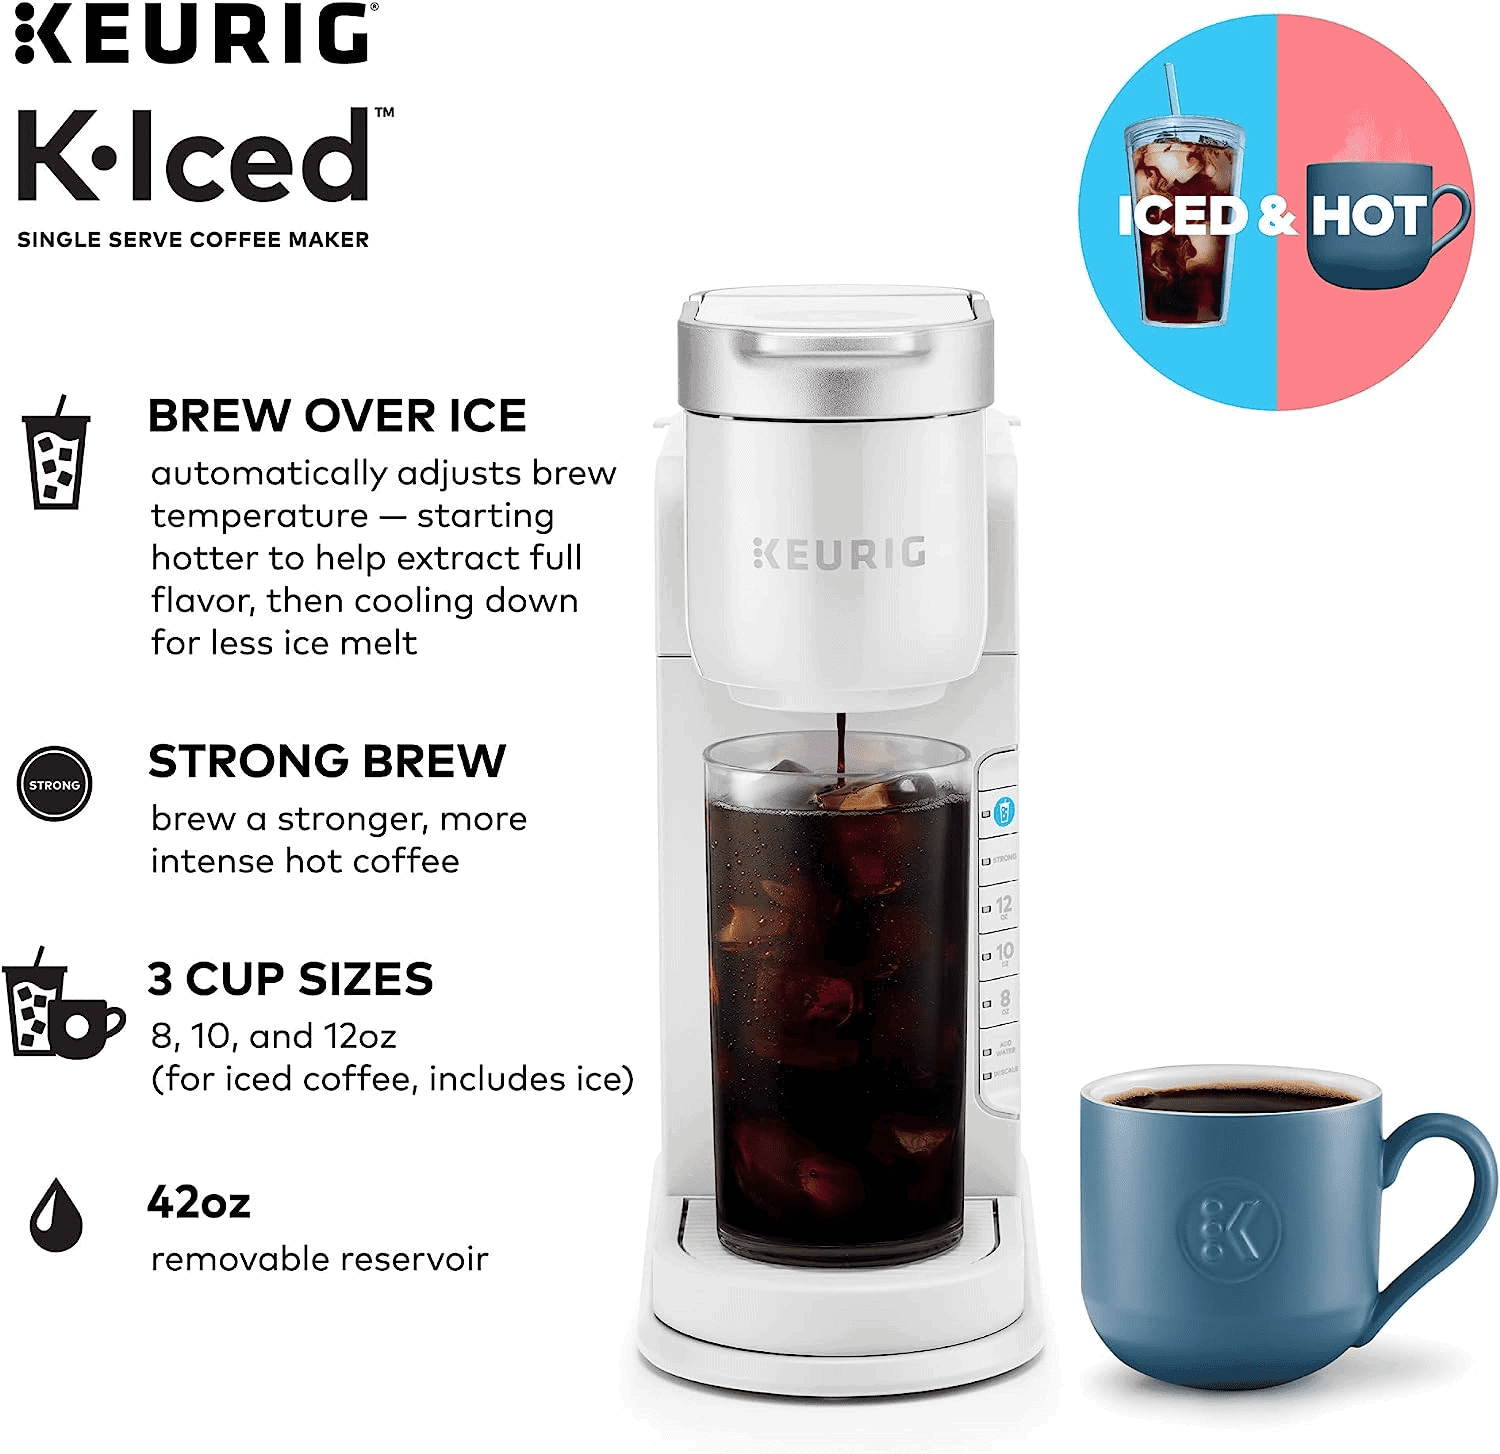 A Keurig K-Iced coffee maker with a cup of iced coffee